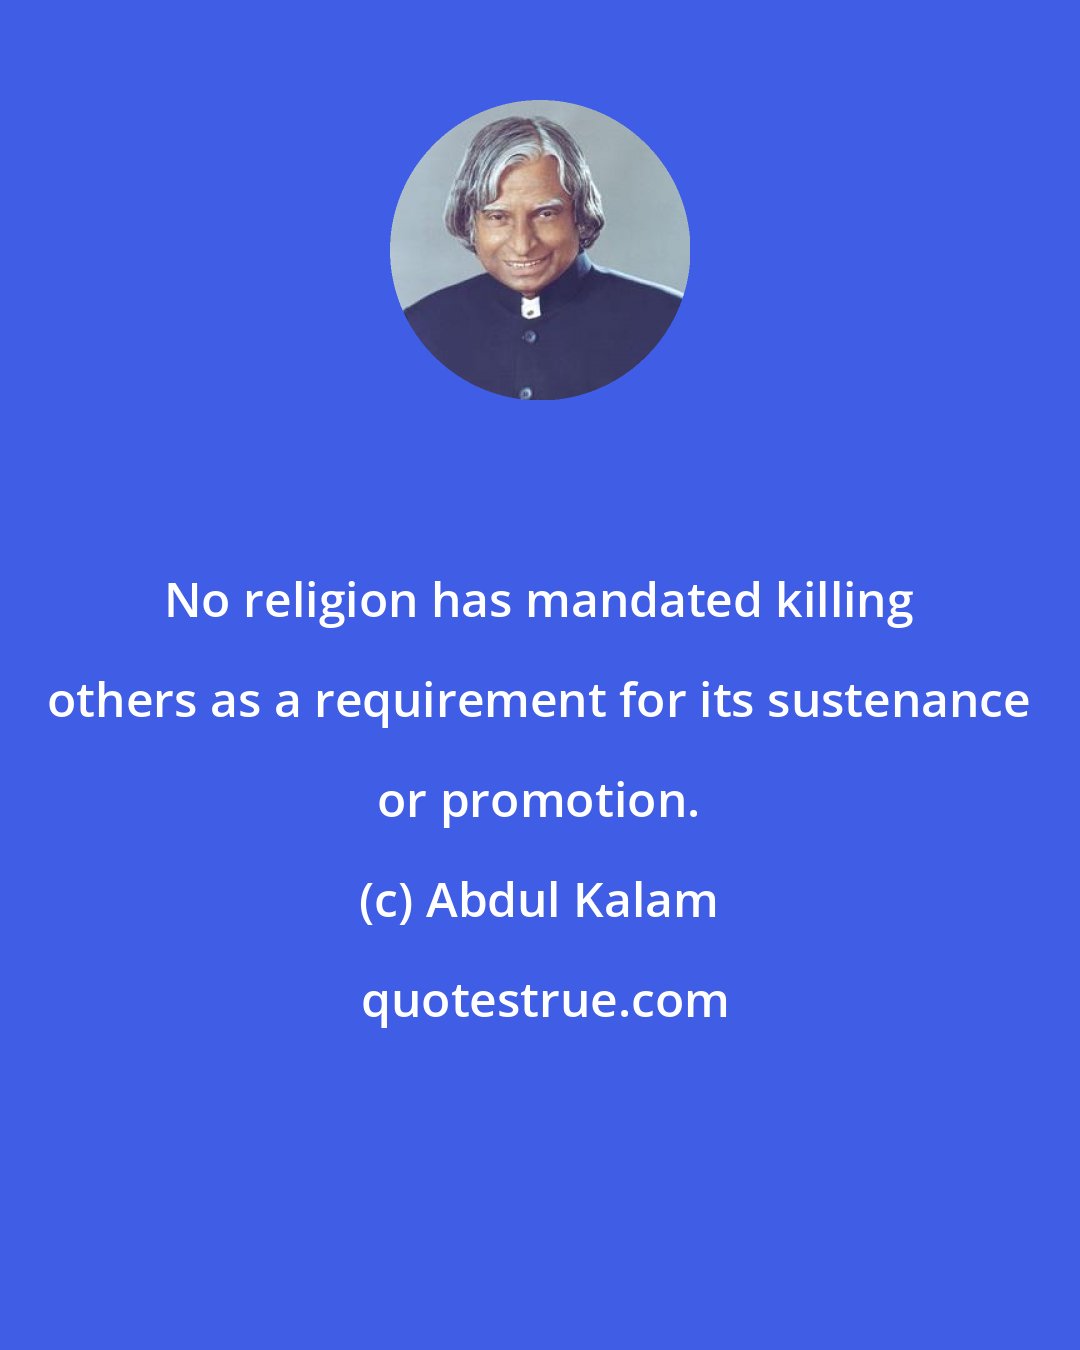 Abdul Kalam: No religion has mandated killing others as a requirement for its sustenance or promotion.